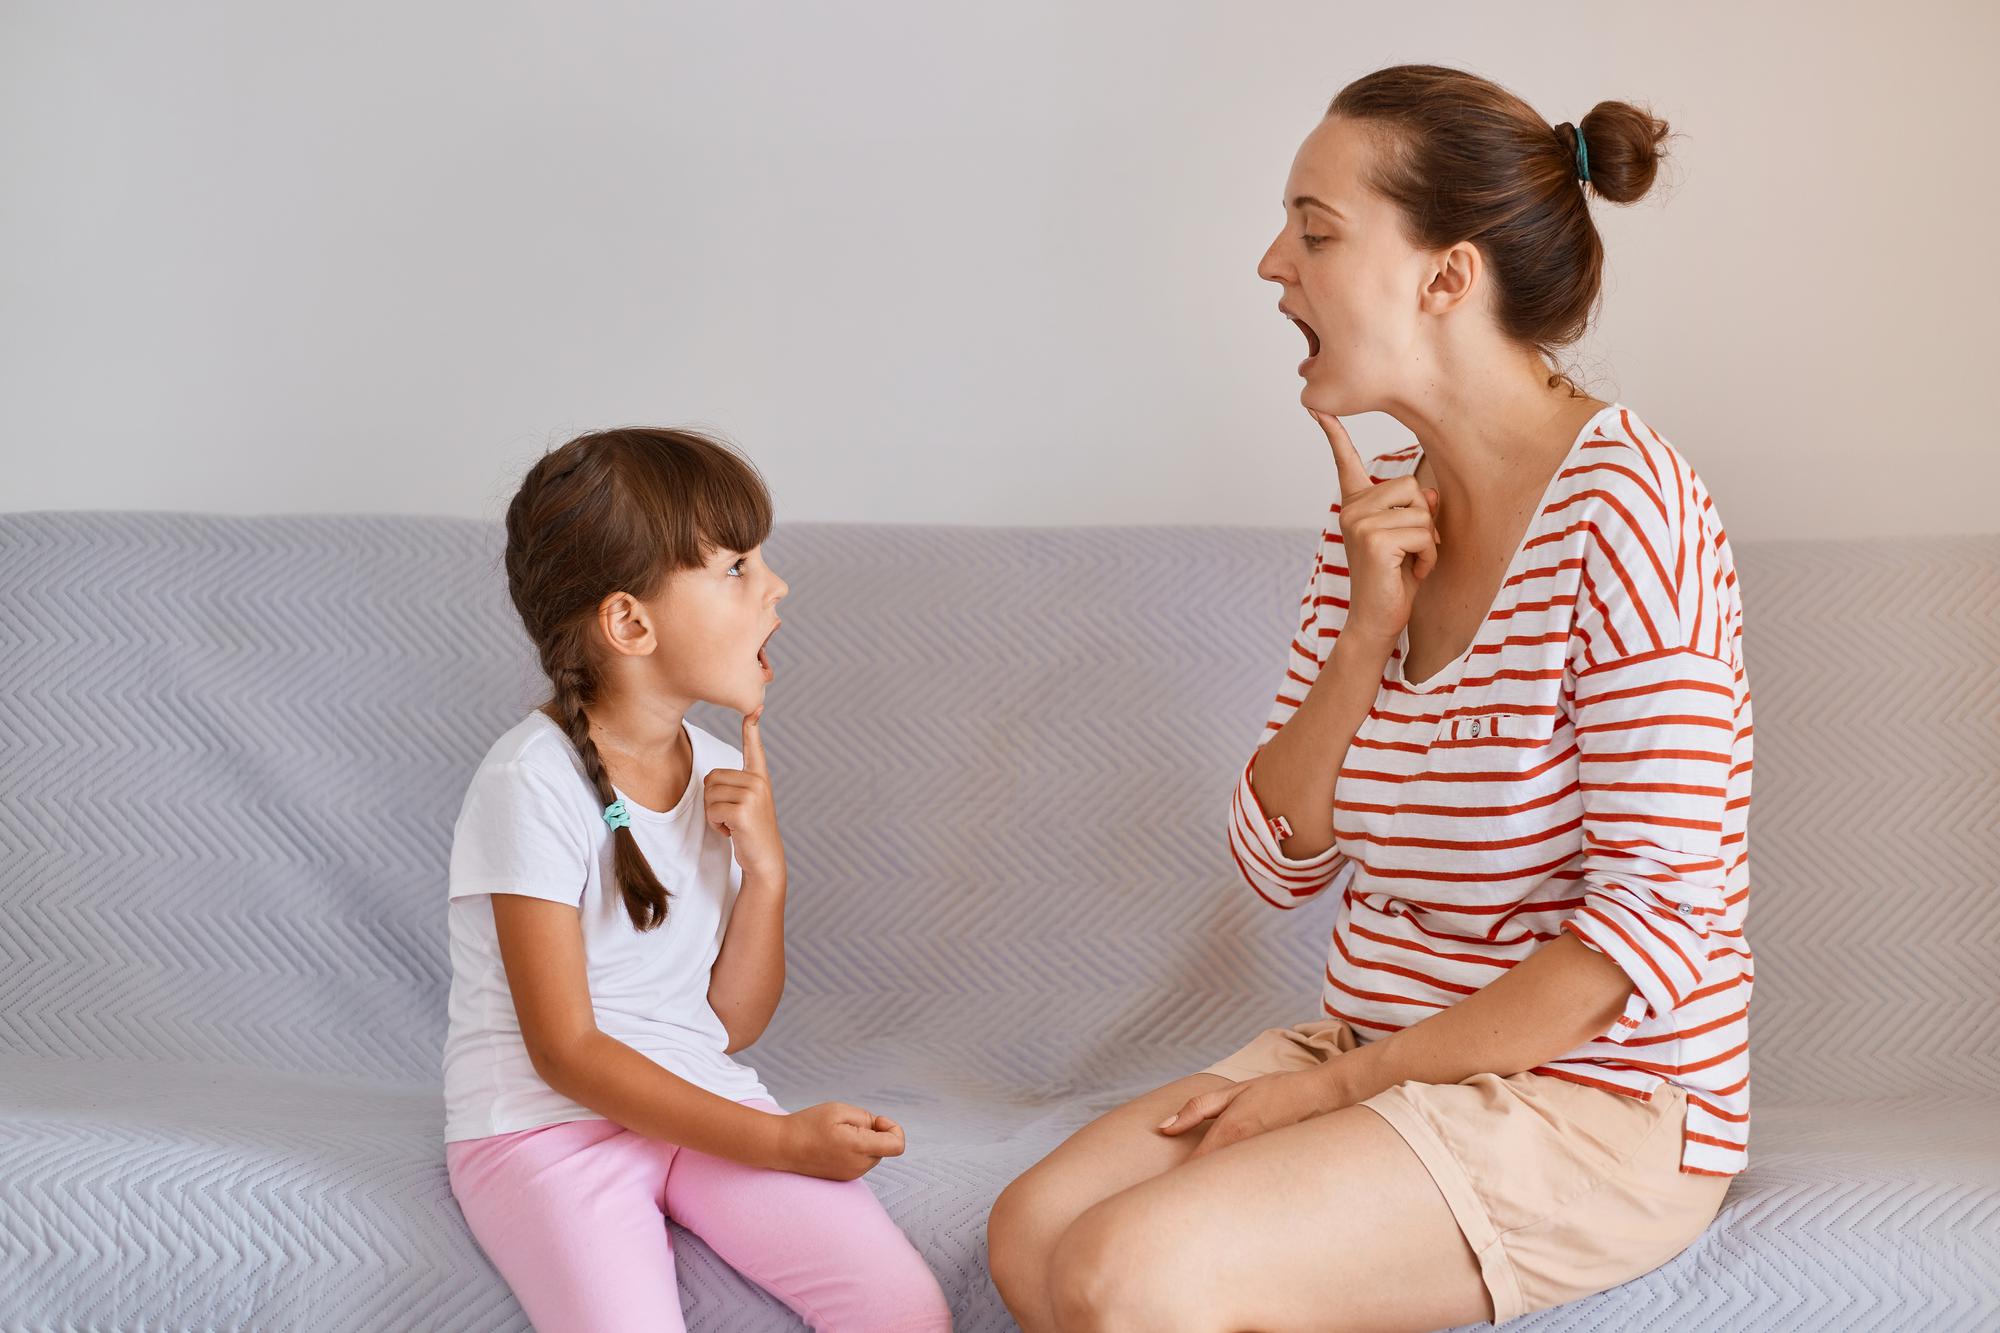 Speech Therapy for Autism